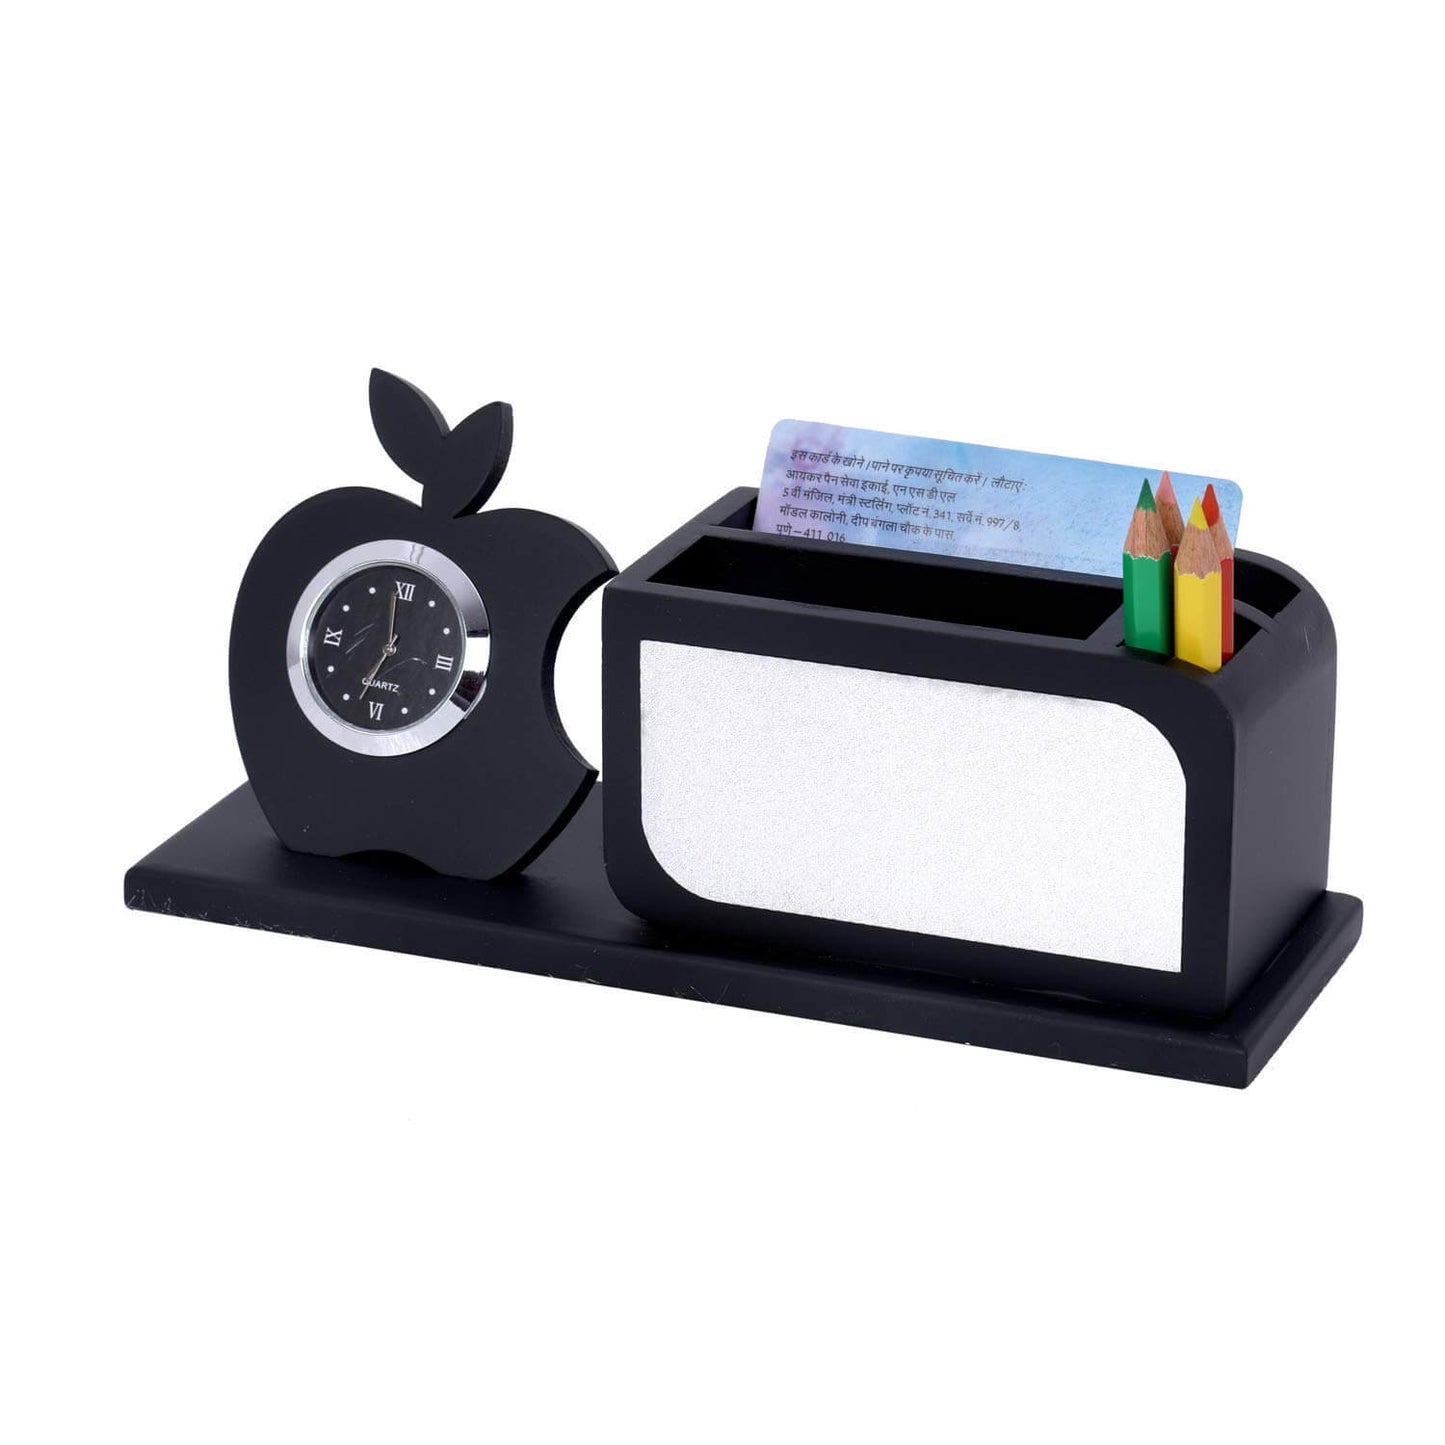 Personalised Gift, Name Printed, Wooden Pen Stand with Clock, Mobile, Card Holder (Black & Silver)